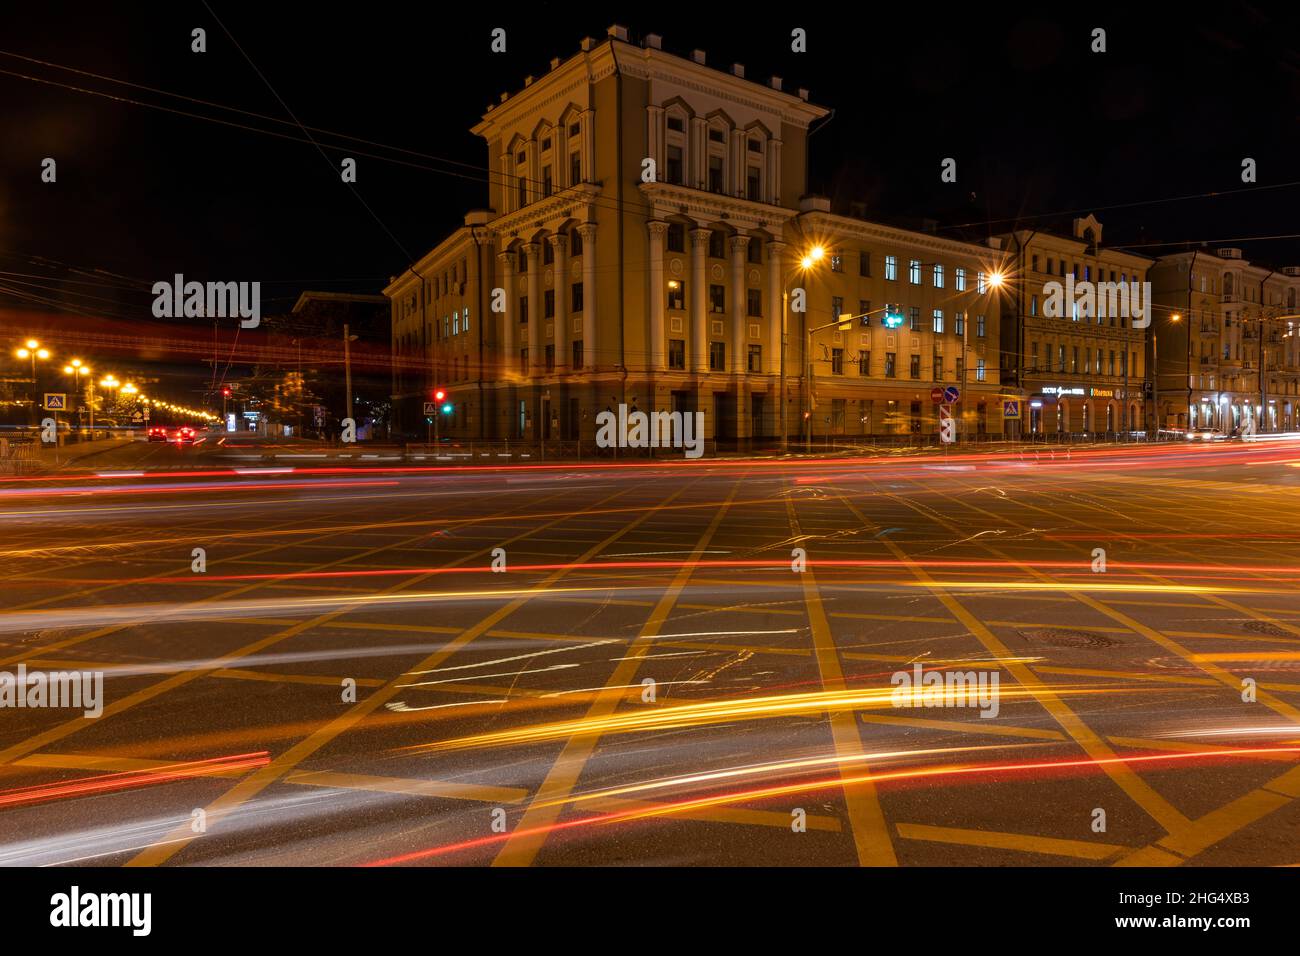 Kazan, Russia - September 21, 2019: Pushkin Street at night with many car lights and stripes in red and yellow, Tartastan, Russia. Stock Photo